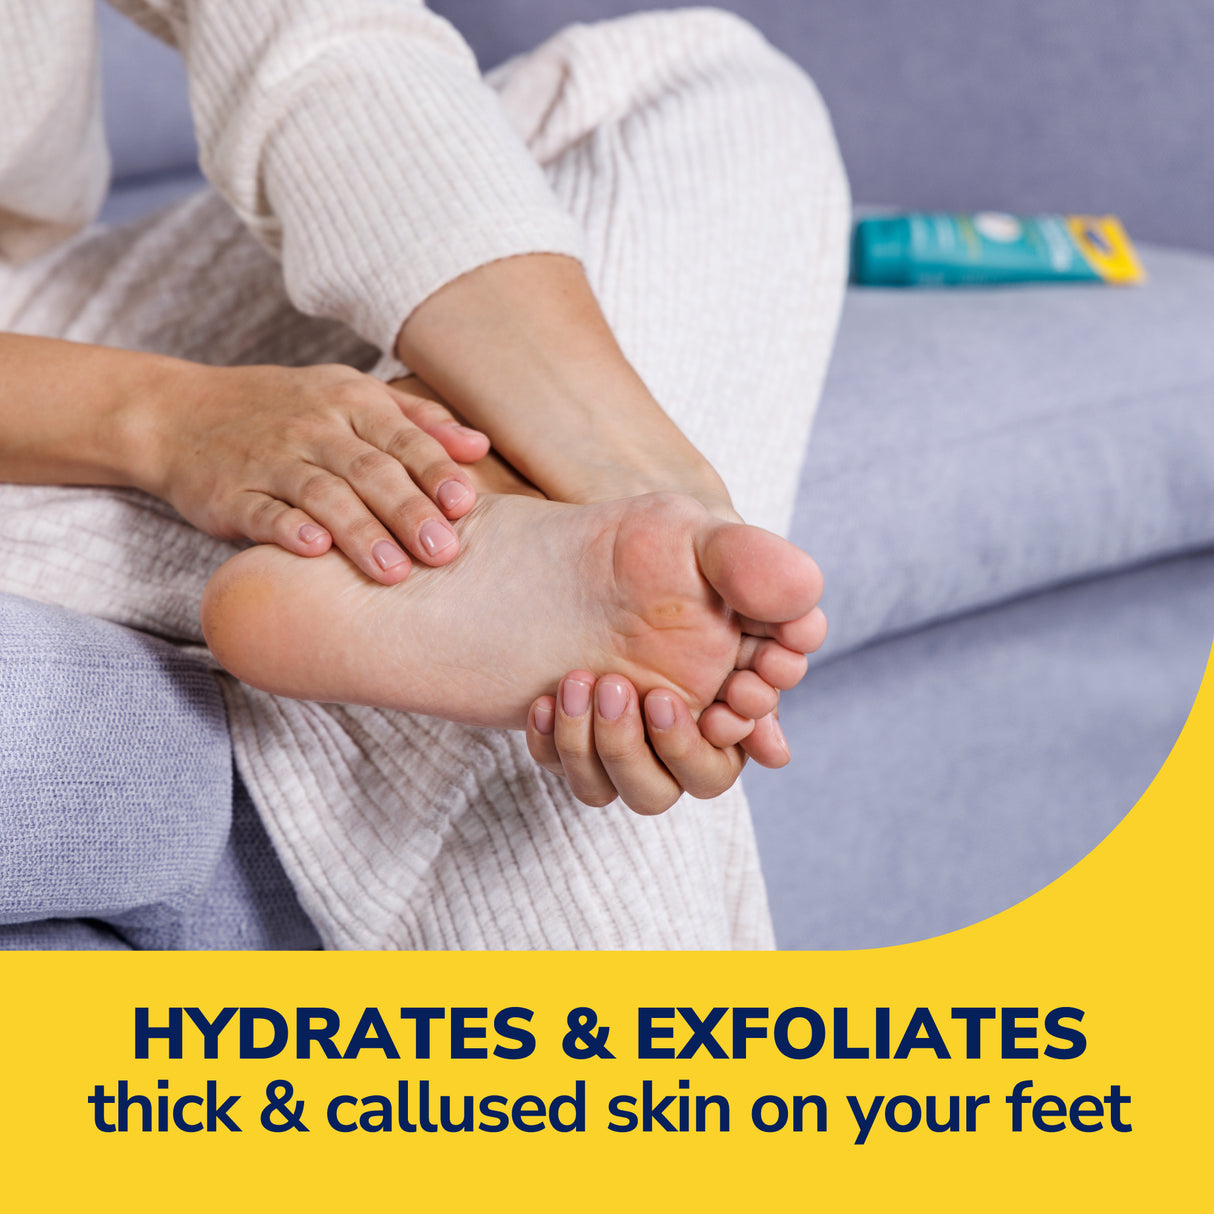 Dry, Flaky Skin Remover Ultra-Exfoliating Foot Lotion